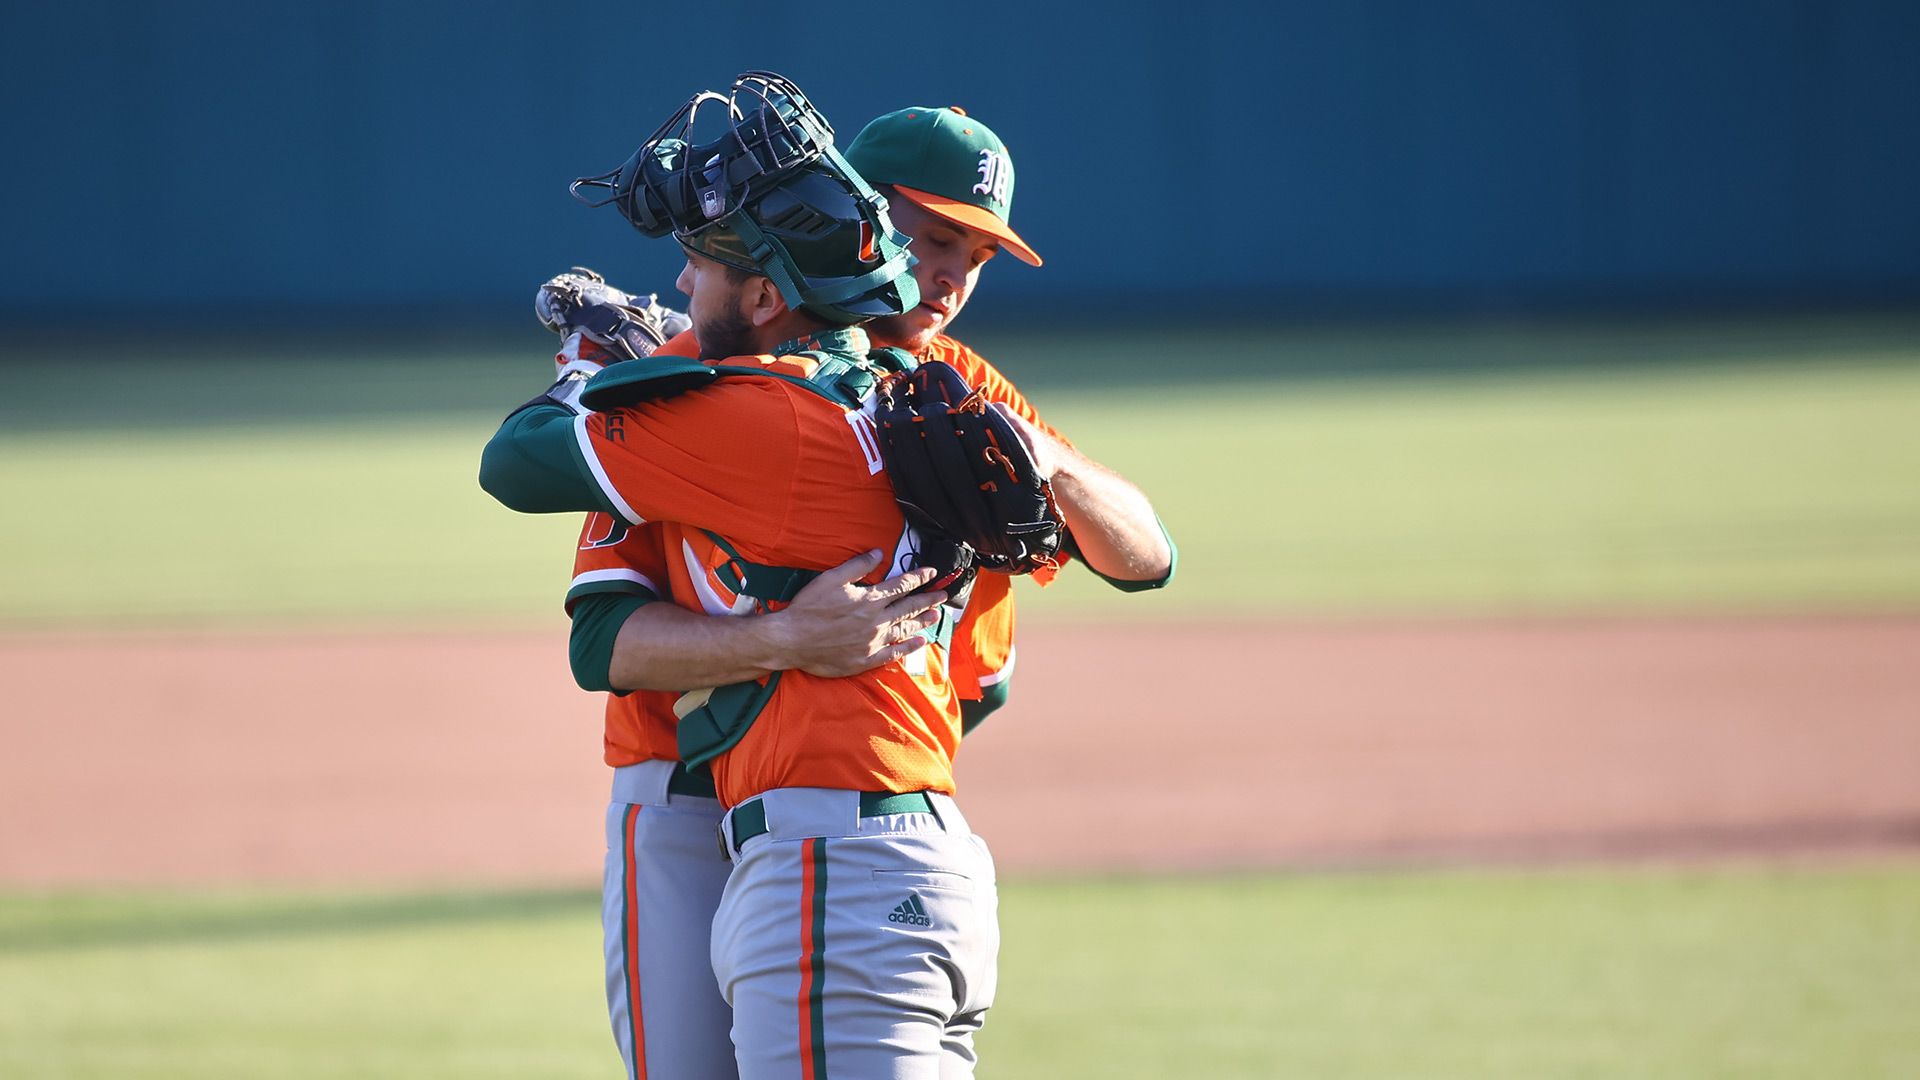 Canes Rally Late to Even Series at NC State